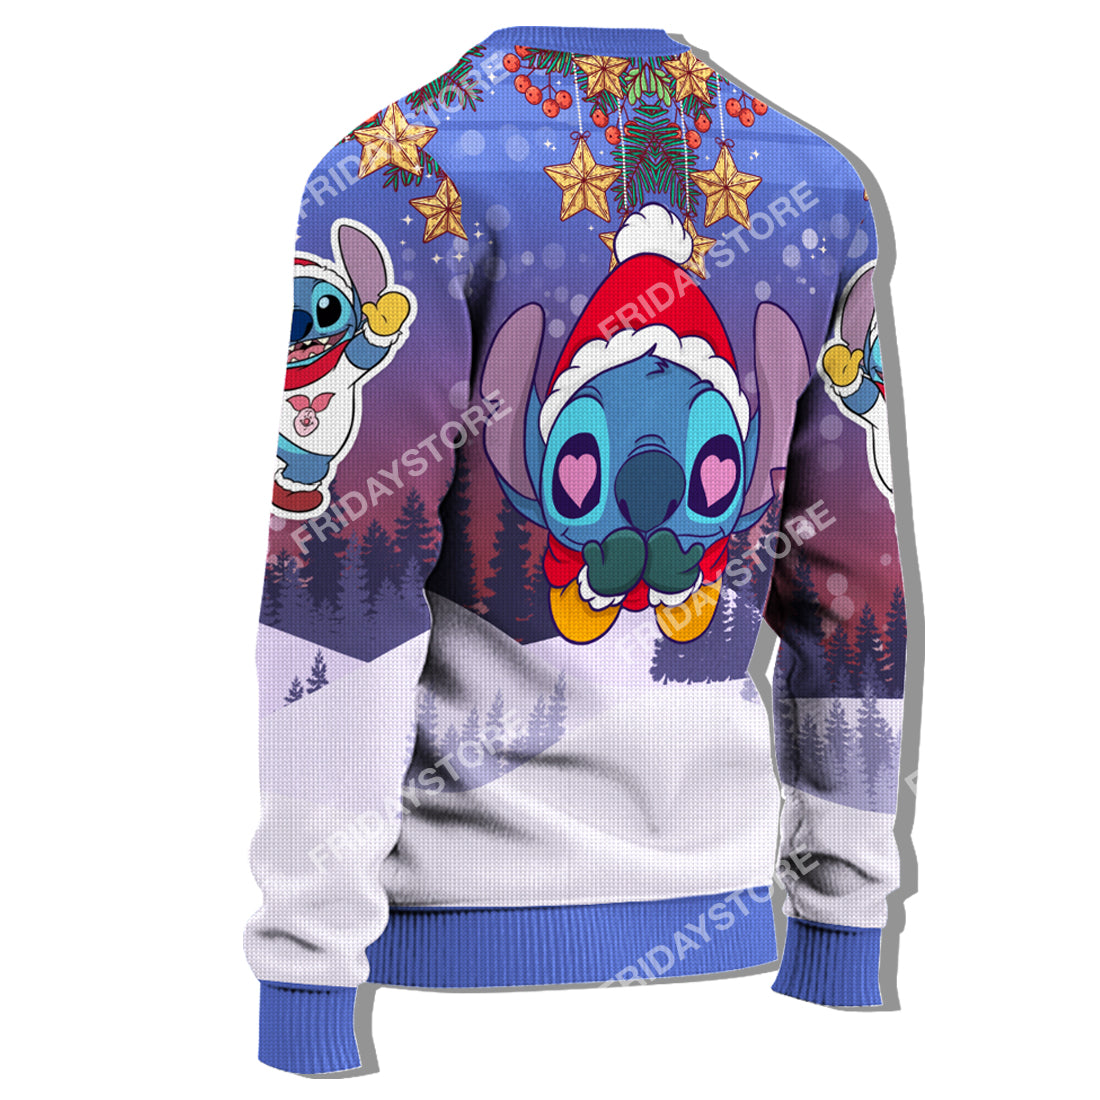 Unifinz LAS Sweater Merry Stitchmas Adorable Christmas Ugly Sweater Amazing Cute DN Stitch Christmas Sweater 2023